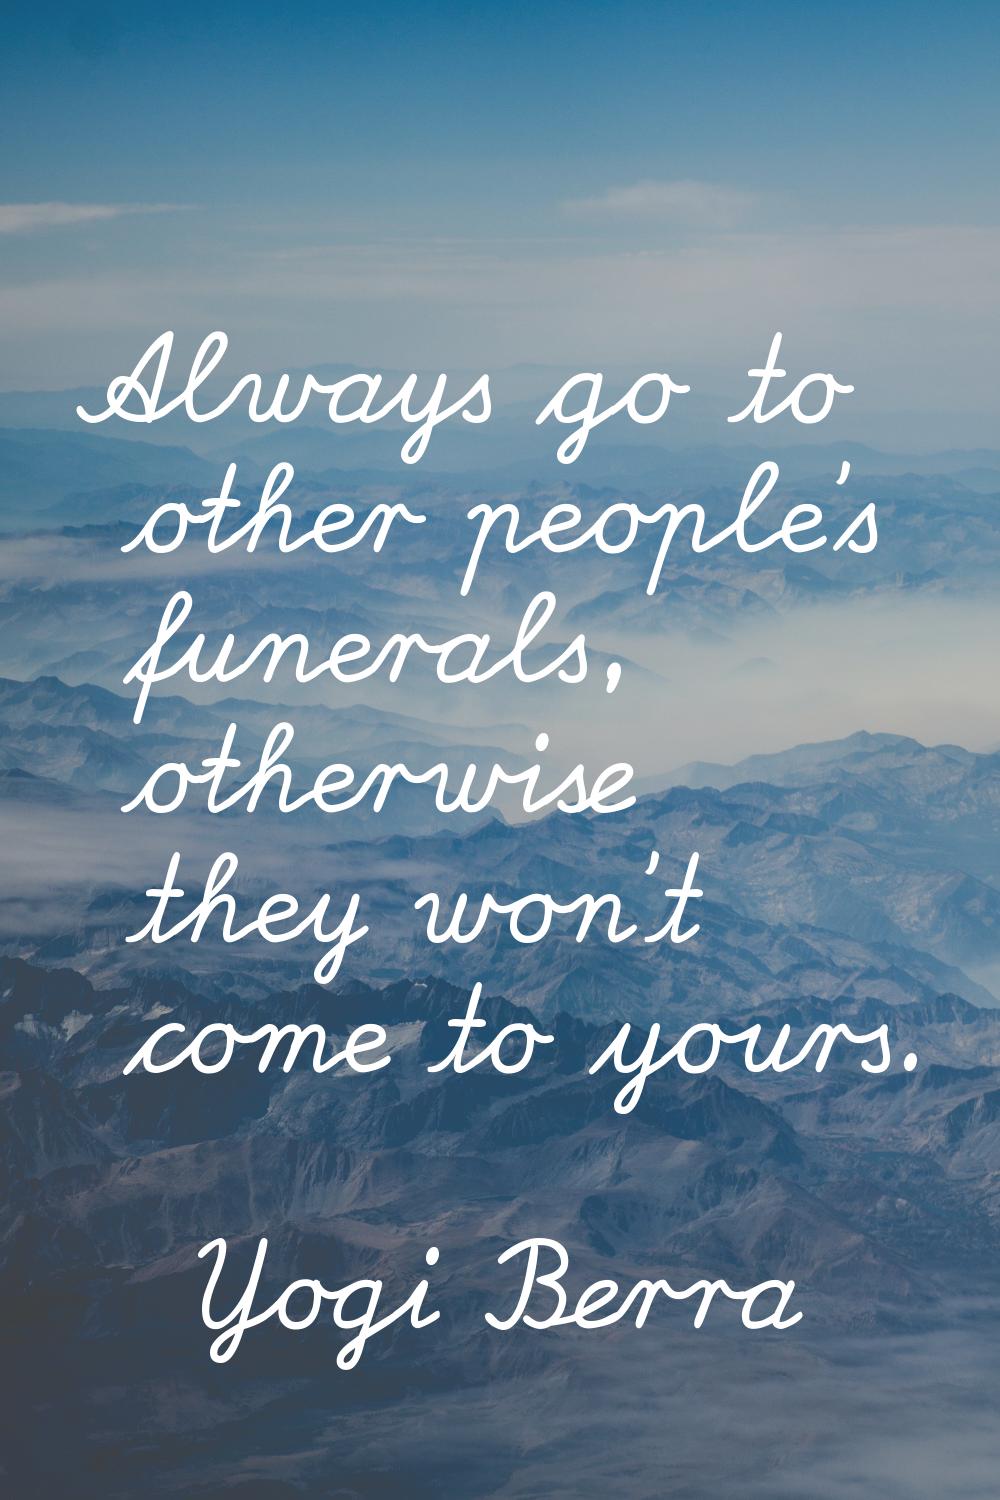 Always go to other people's funerals, otherwise they won't come to yours.